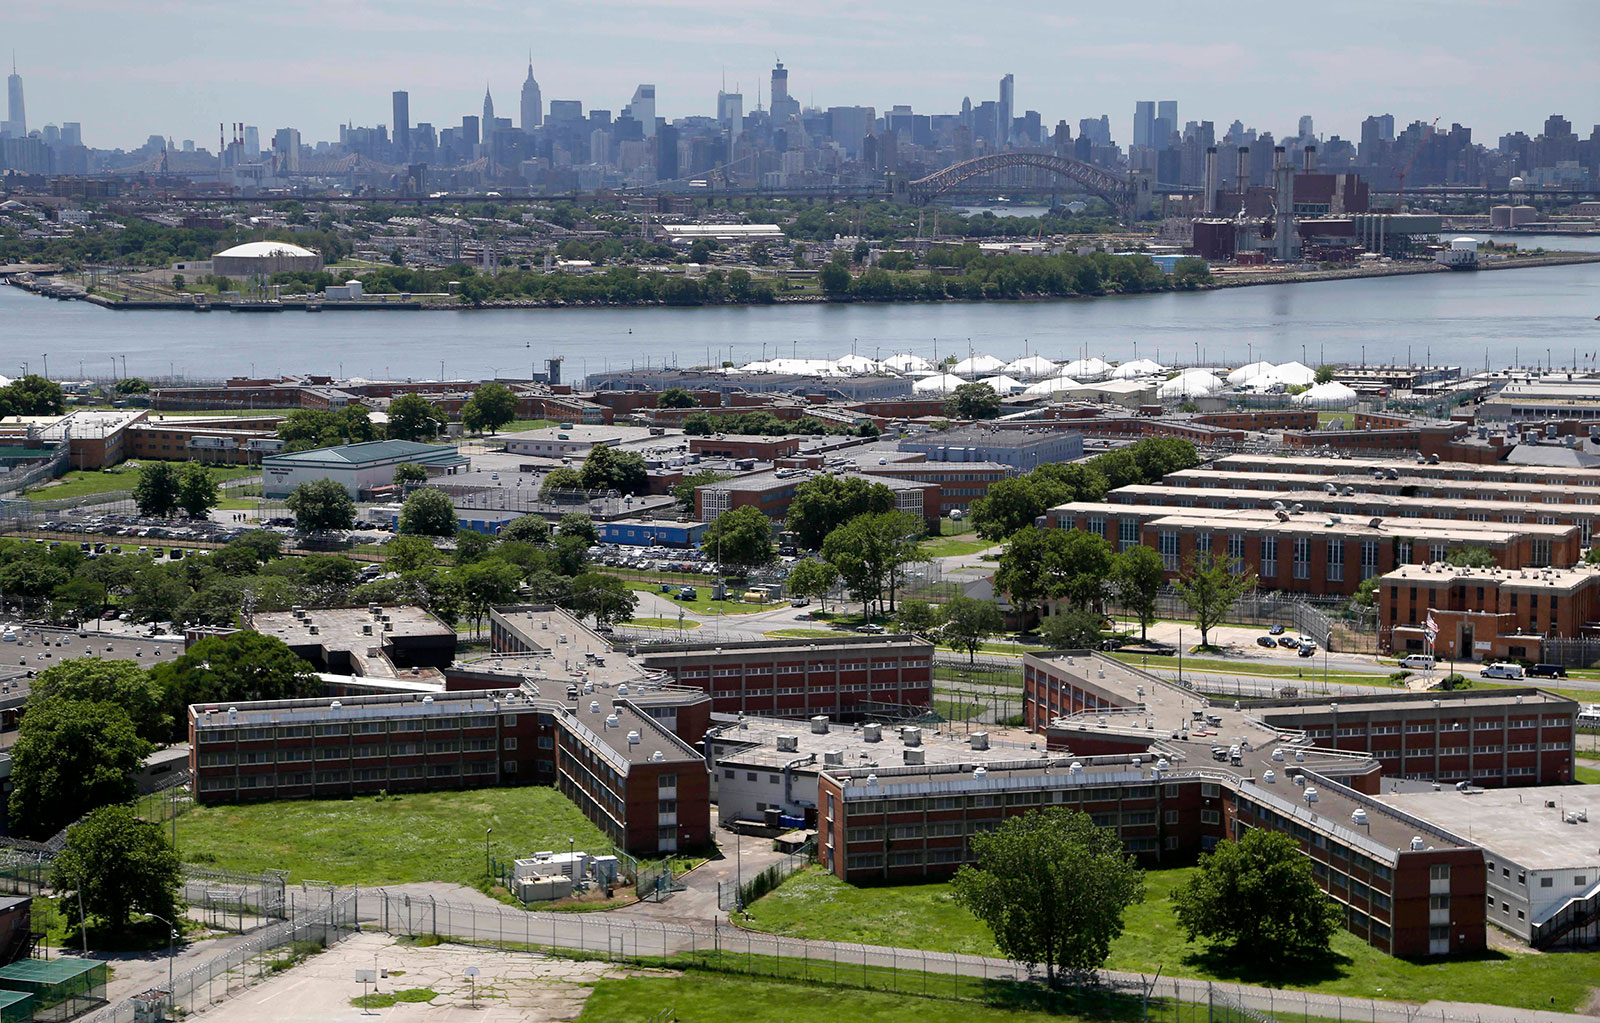 An aerial view of Rikers Island correctional facility in New York City.